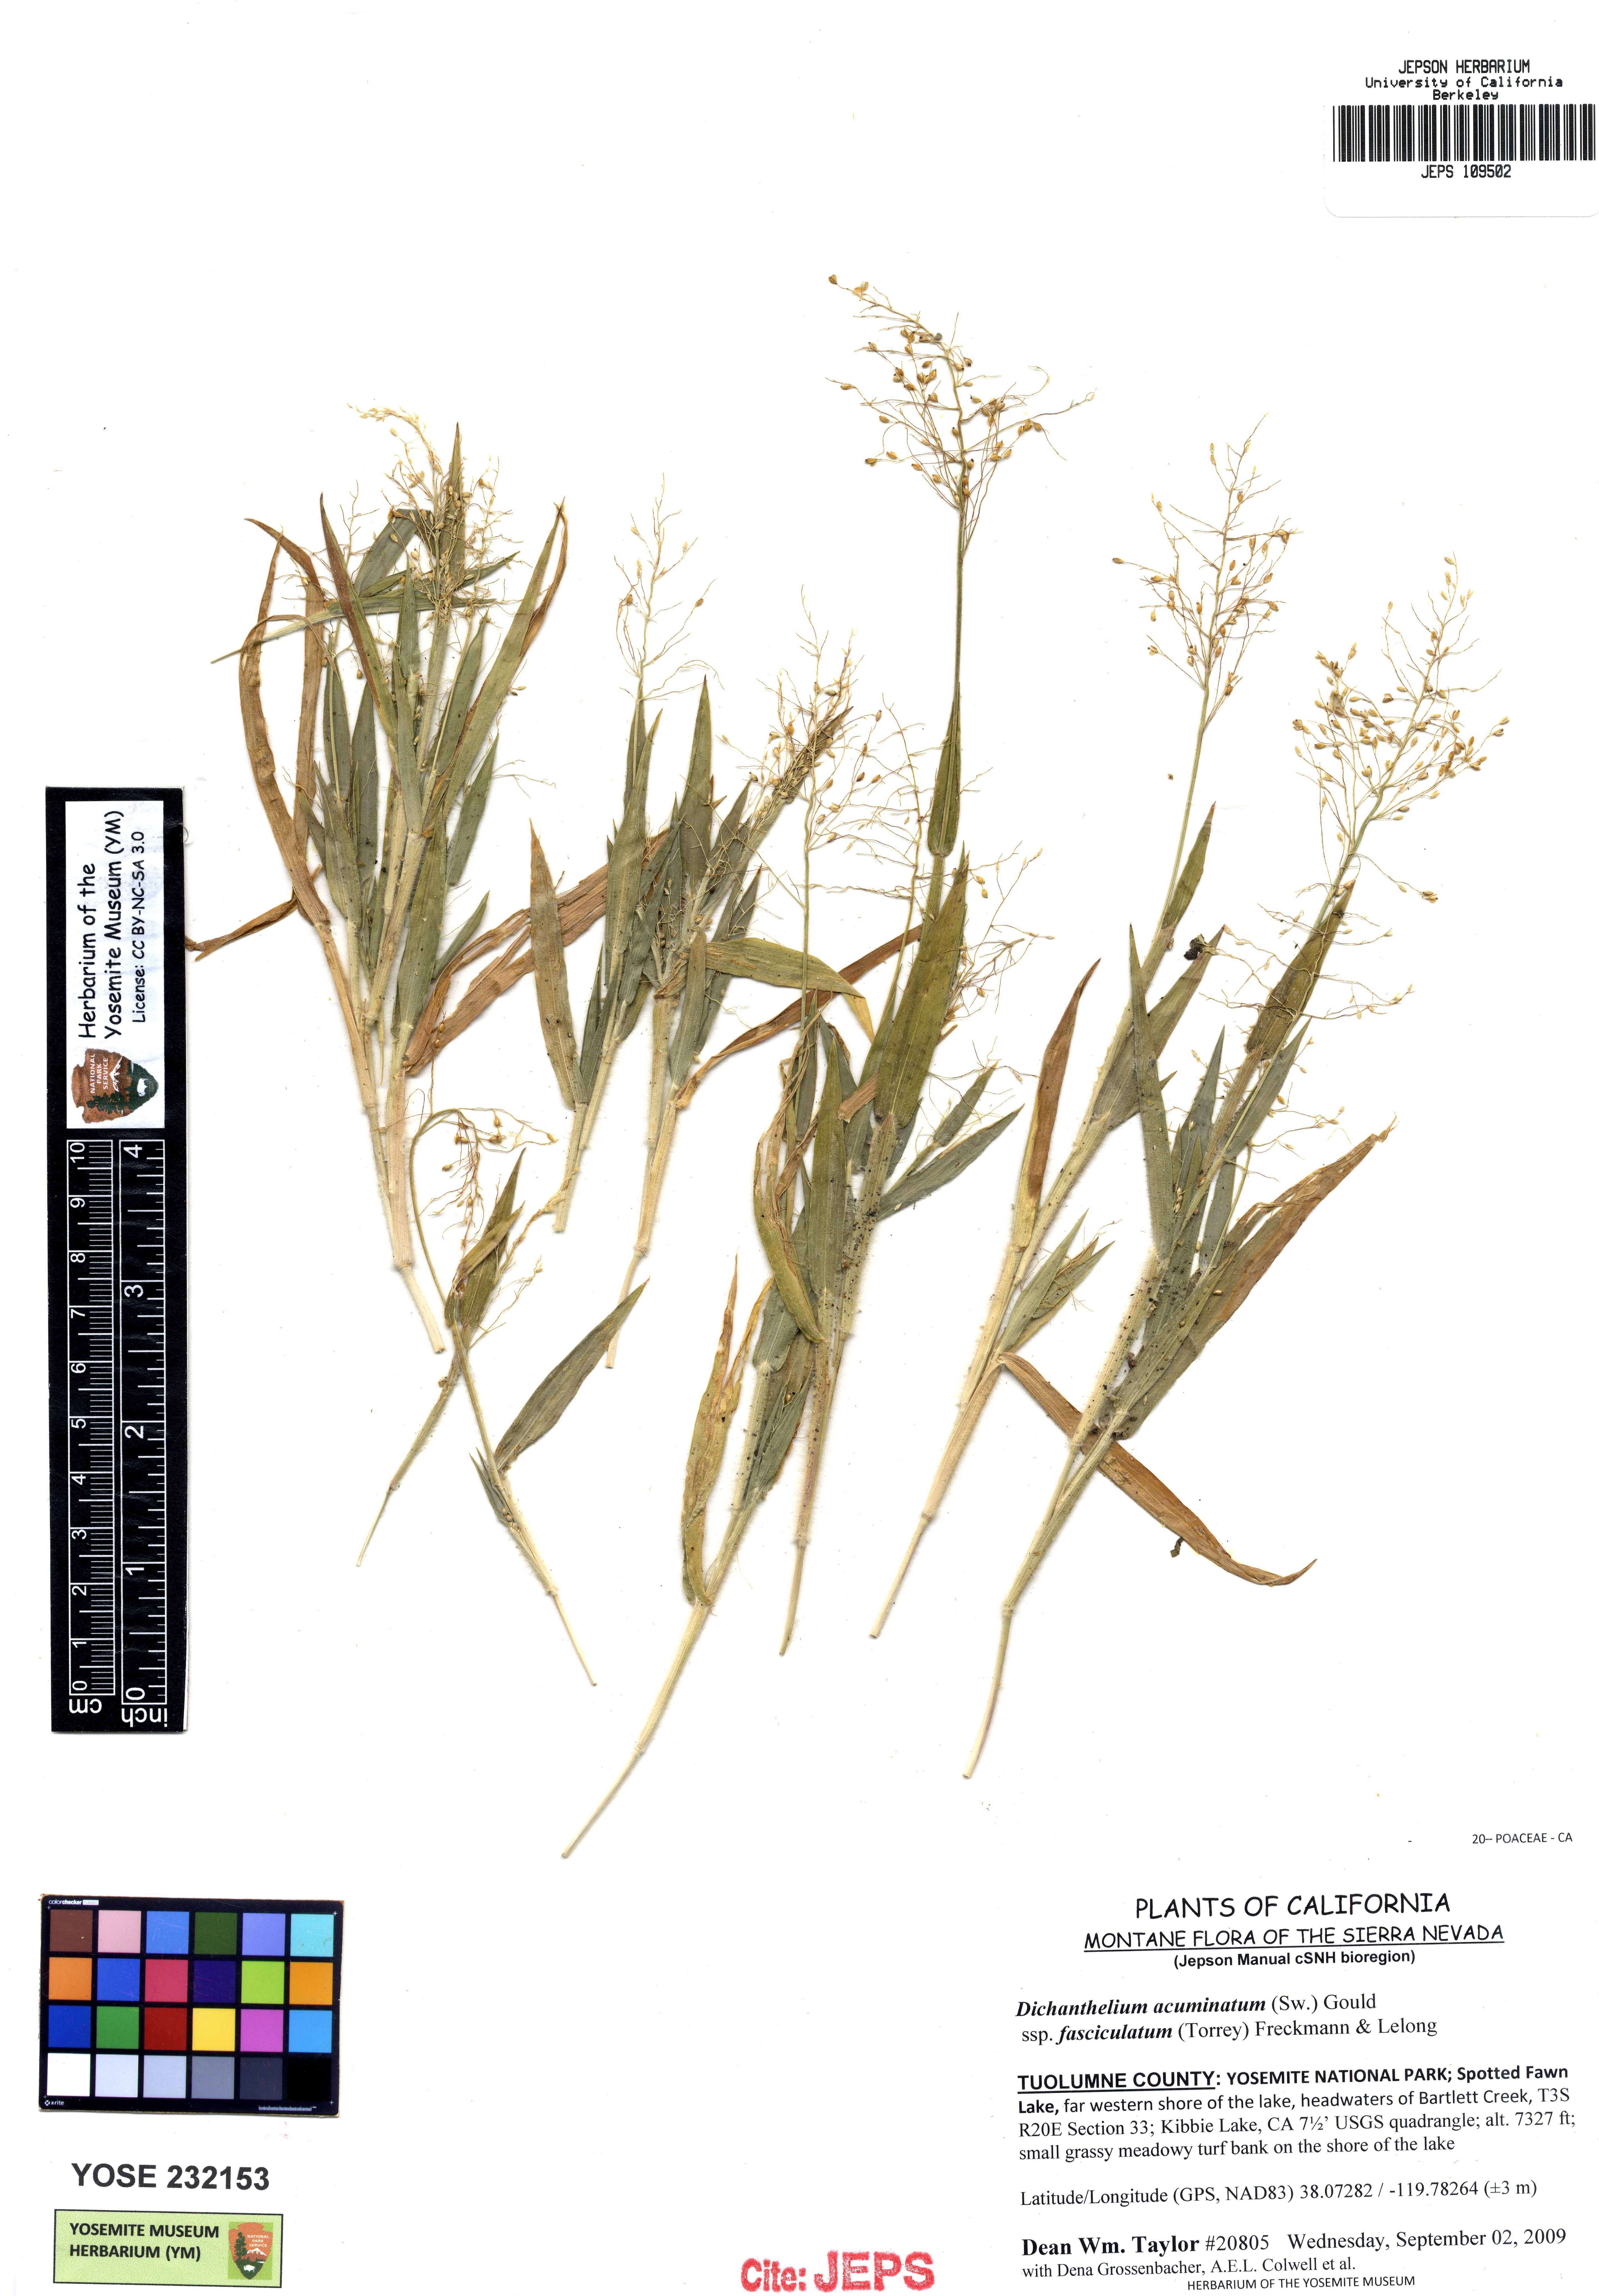 Image of western panicgrass